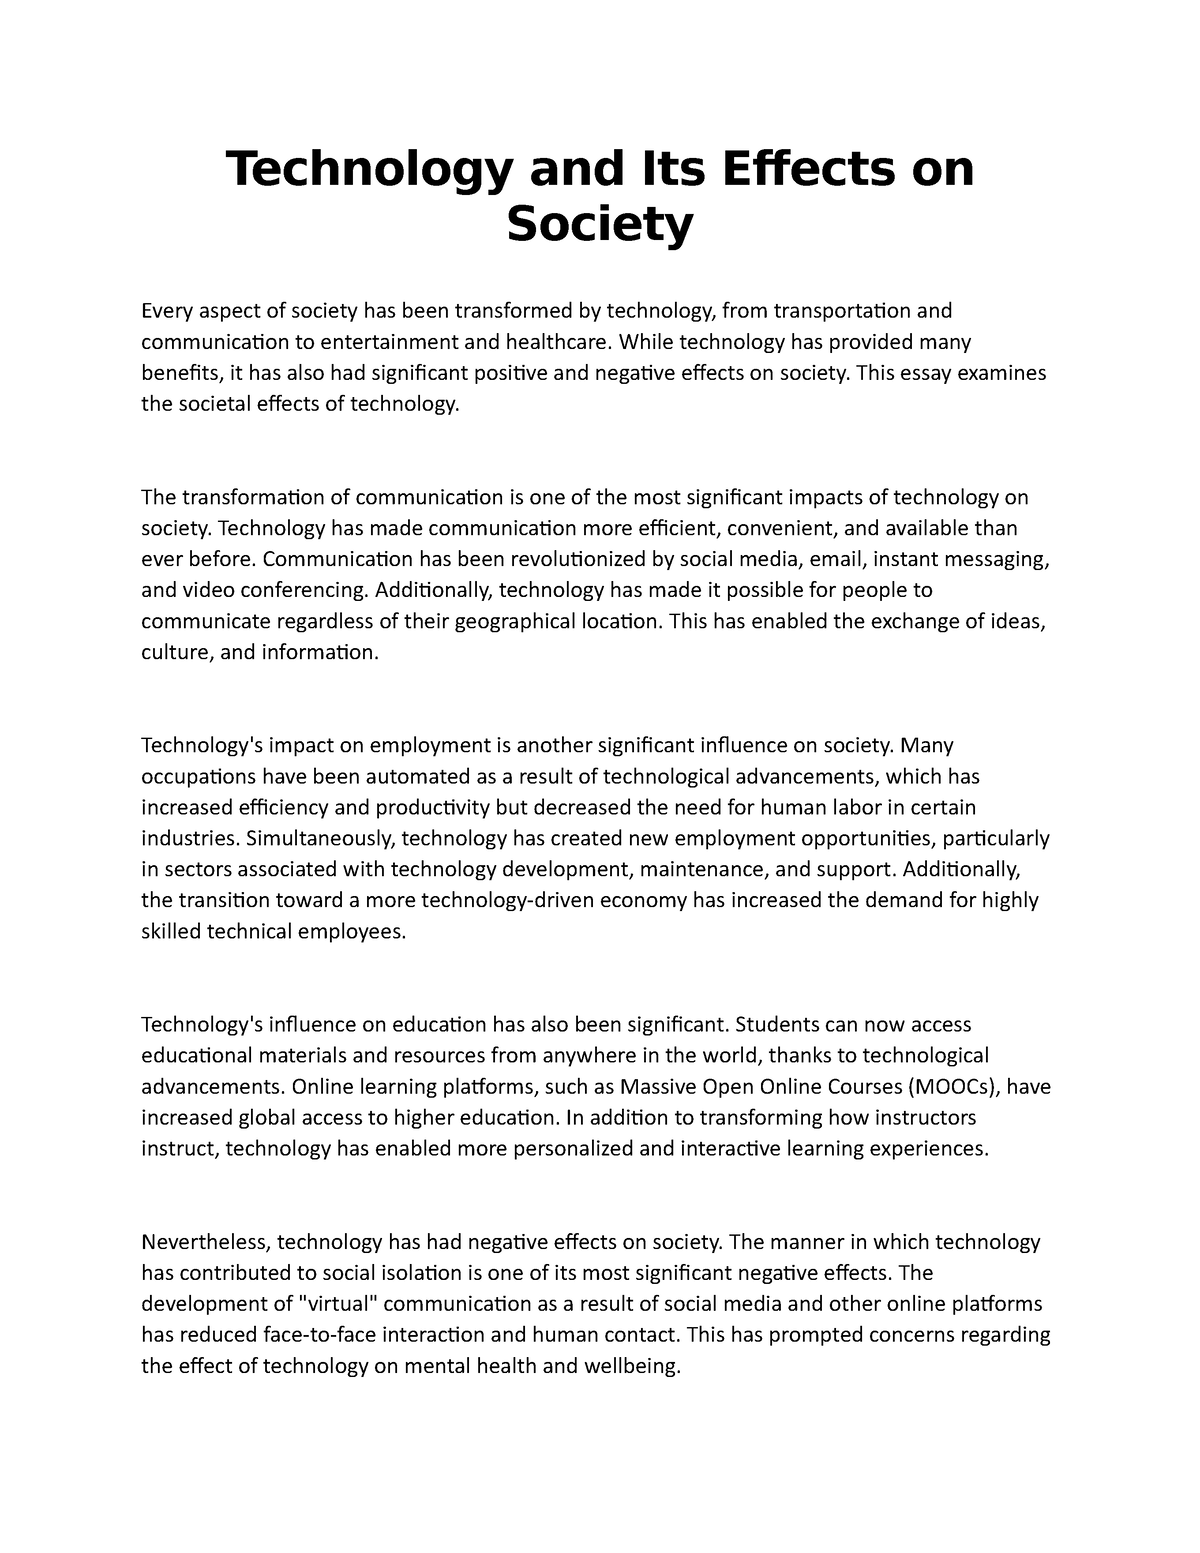 impact of information technology on society essay